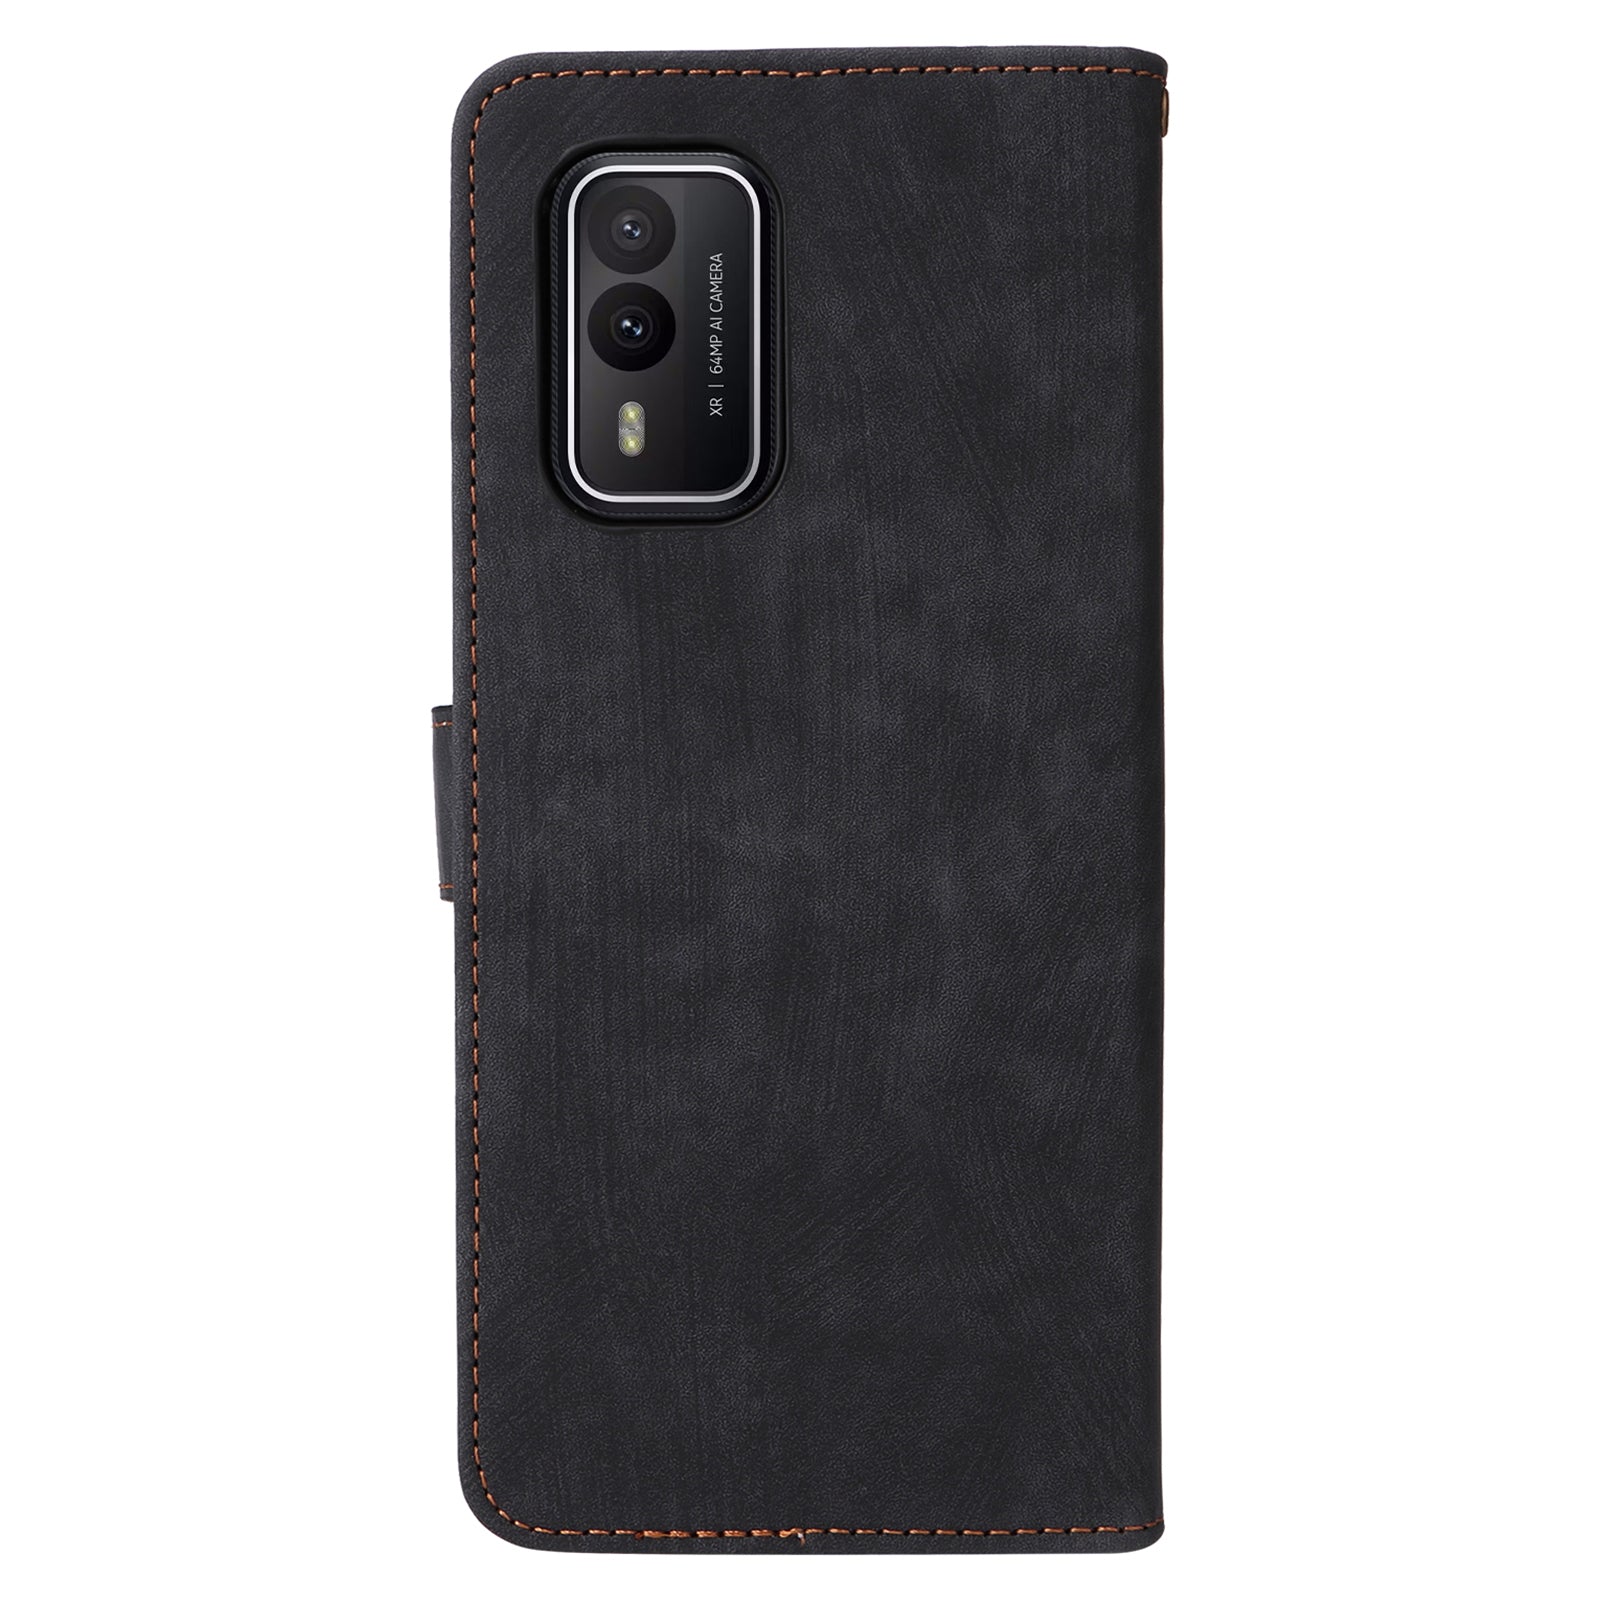 Uniqkart for Nokia XR21 RFID Blocking Phone Cover Wallet Stand Shell Shockproof Leather Case - Black